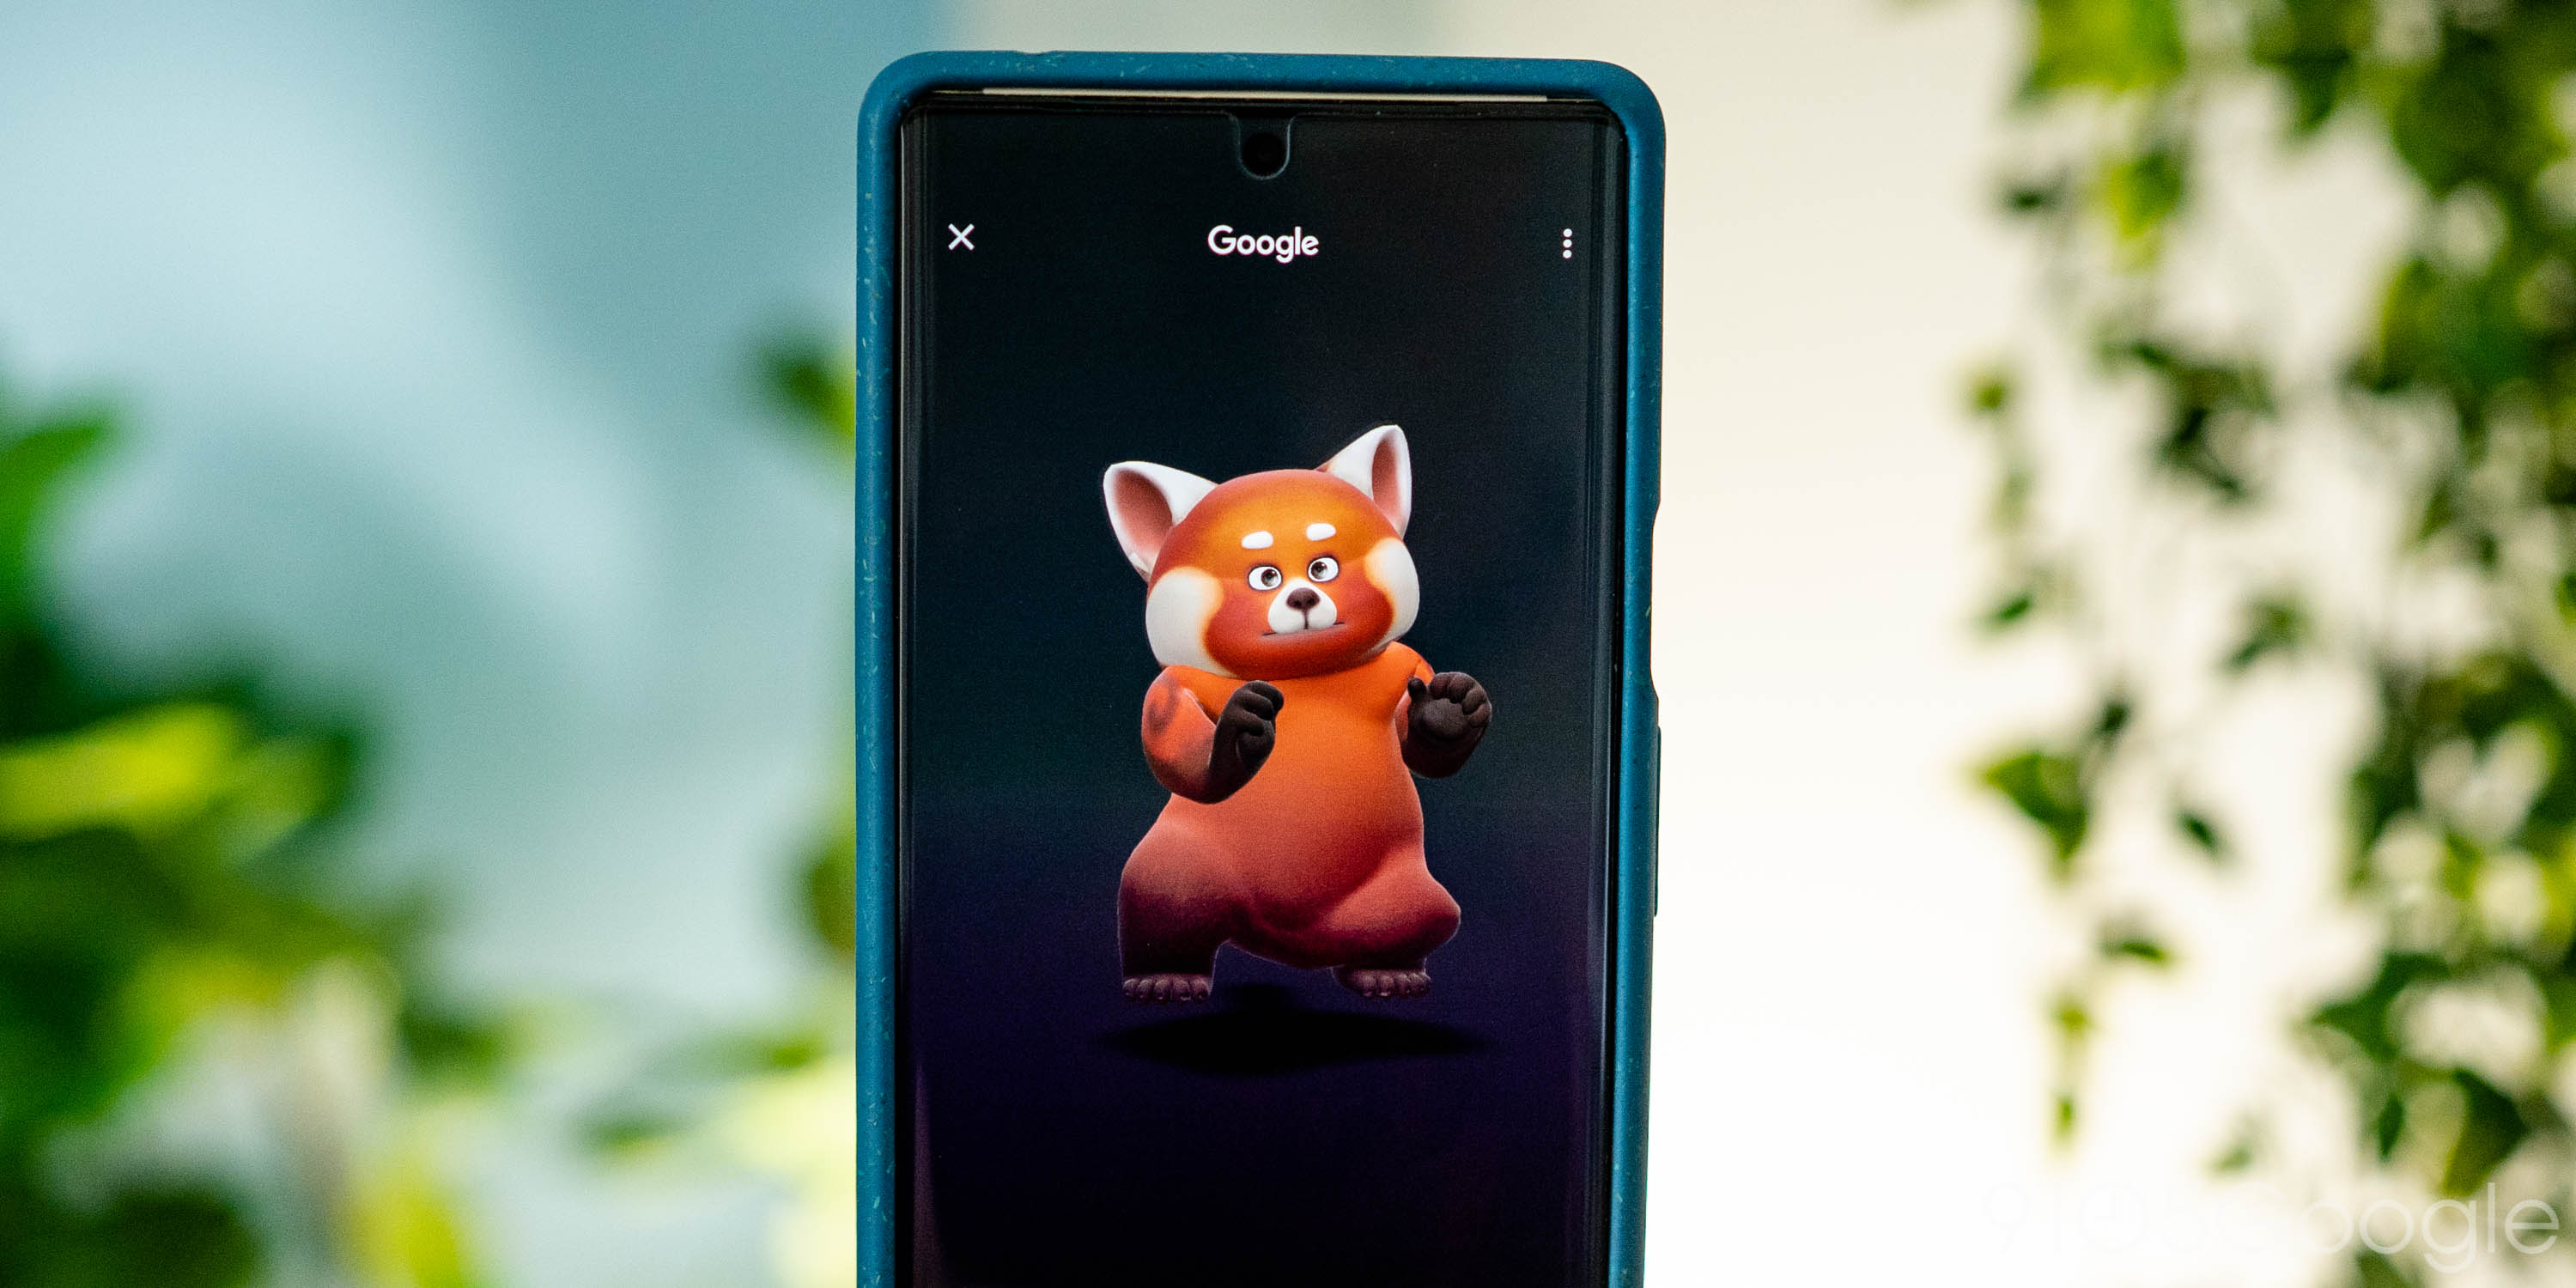 Google adds 3D Red Panda from 'Turning Red' - 9to5Google